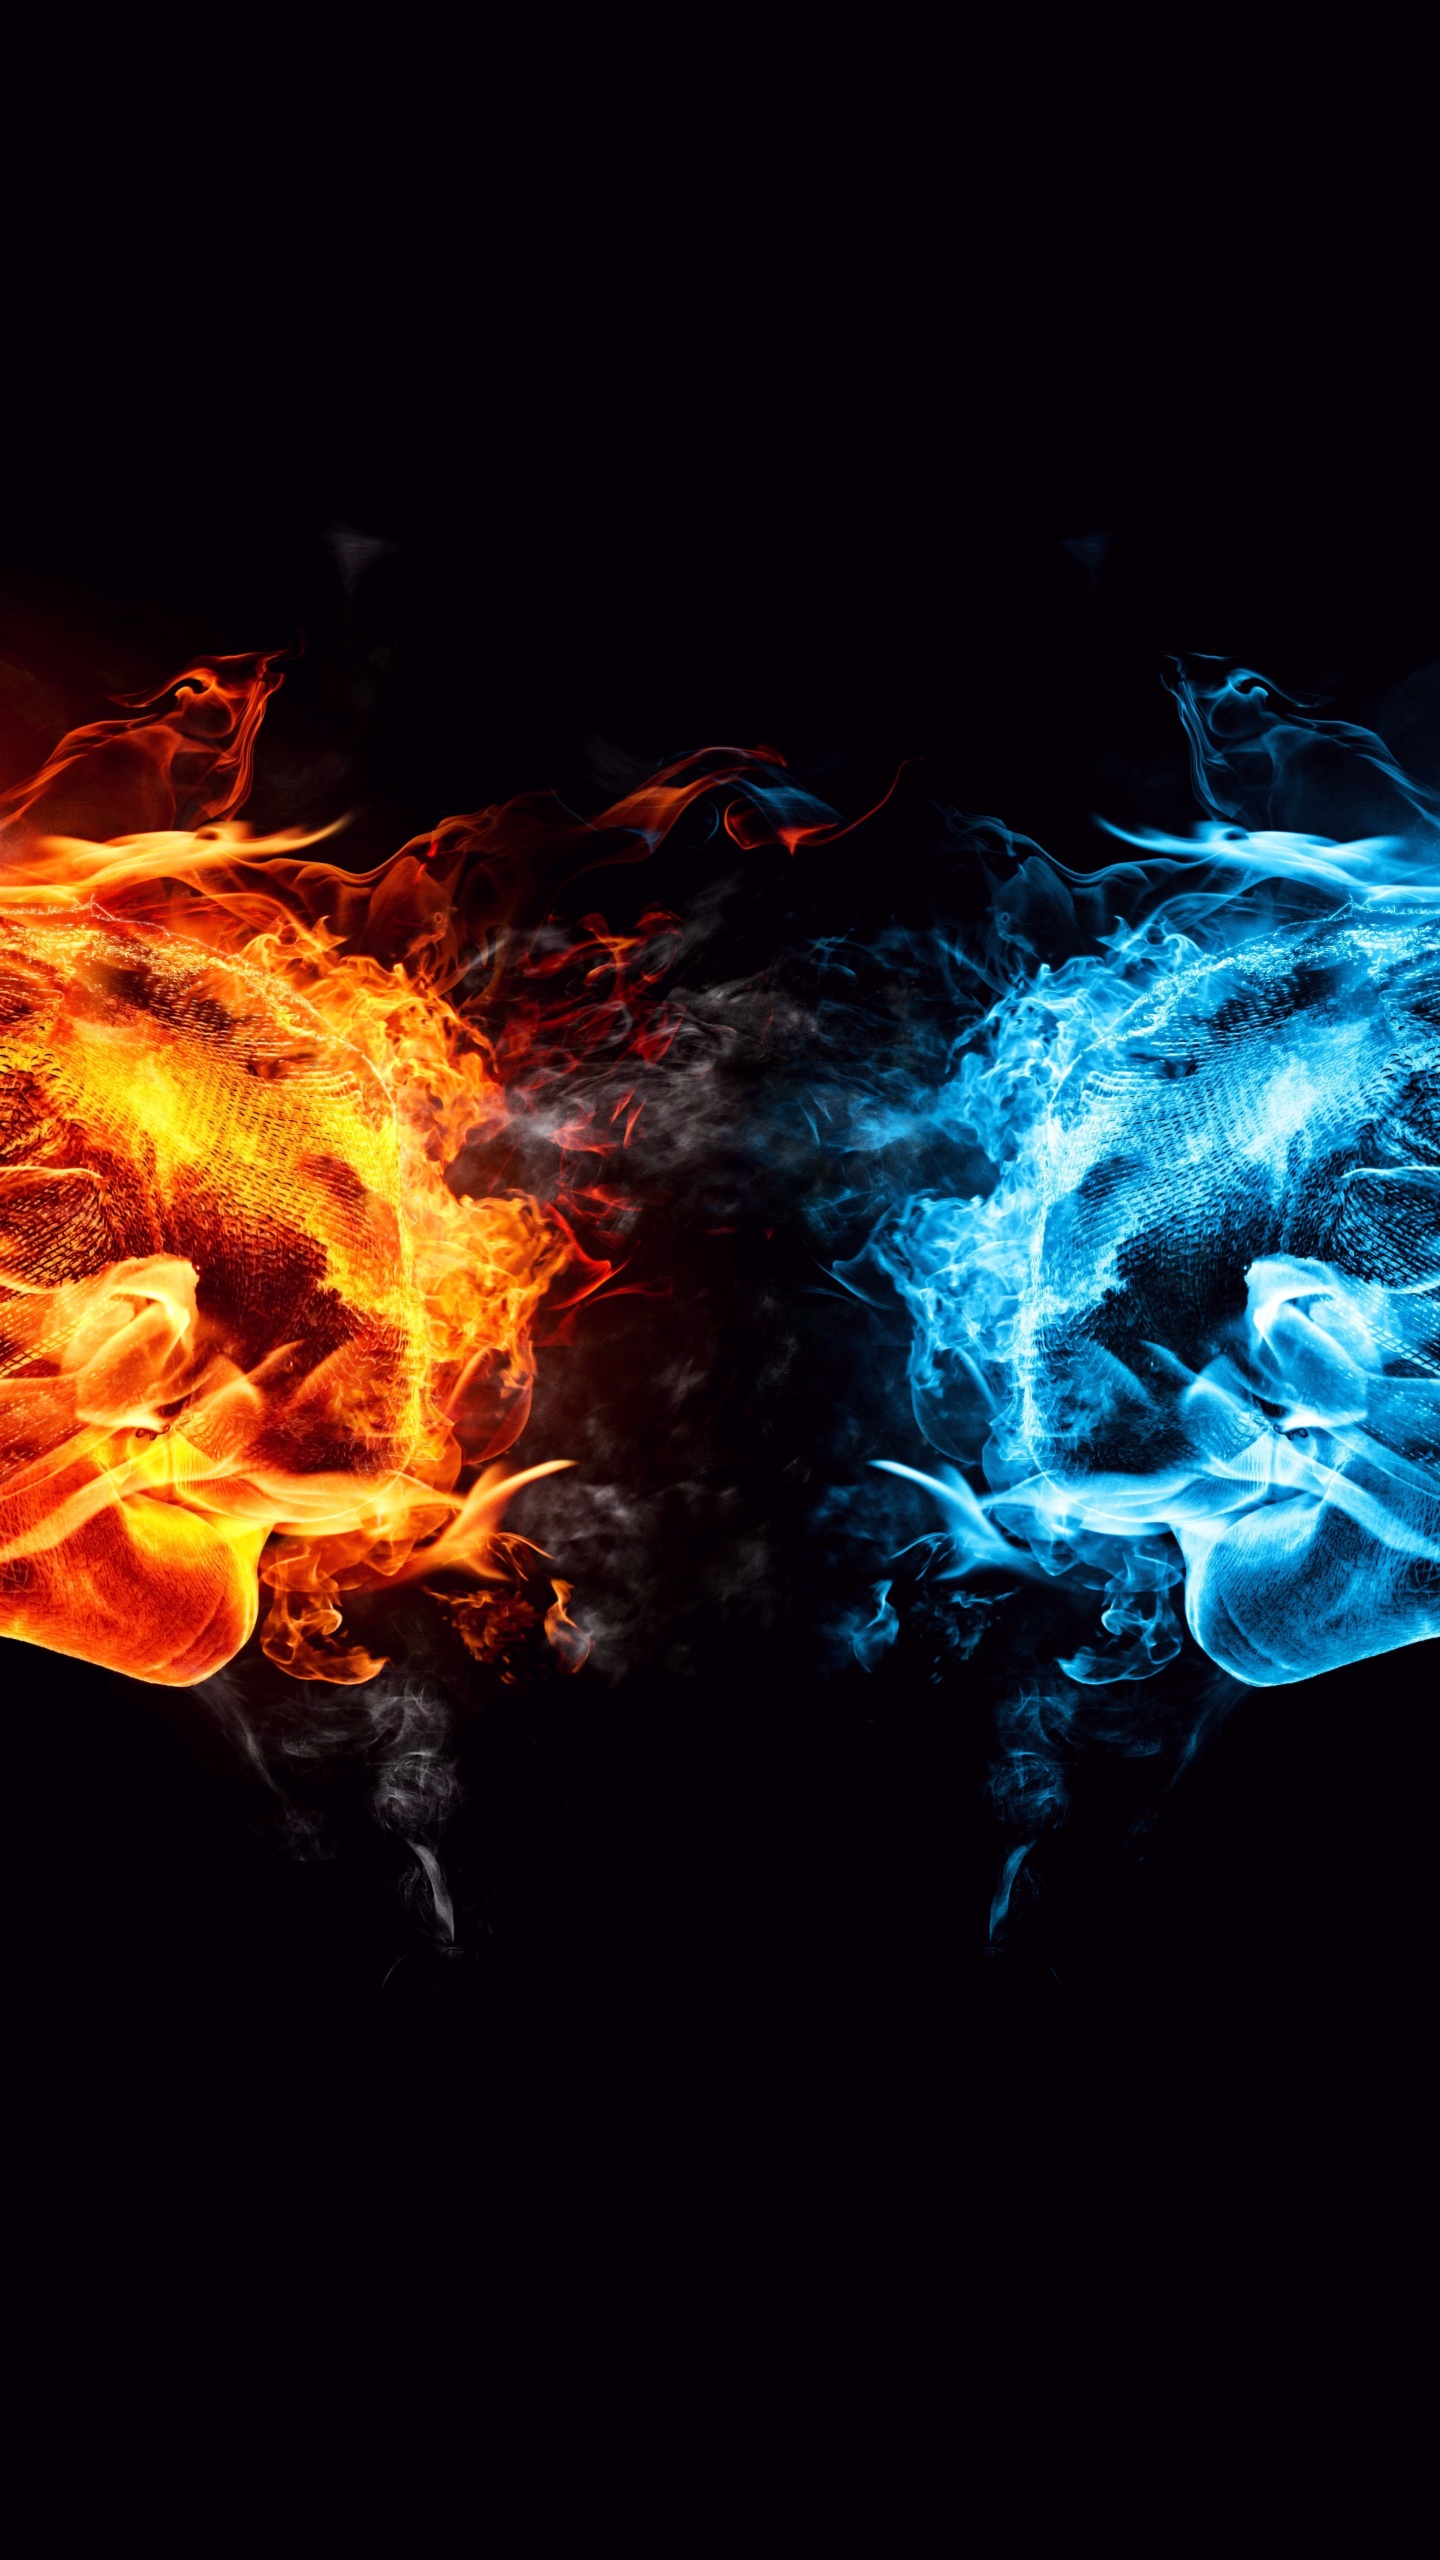 Blue and Orange Flame Illustration. Wallpaper in 1440x2560 Resolution